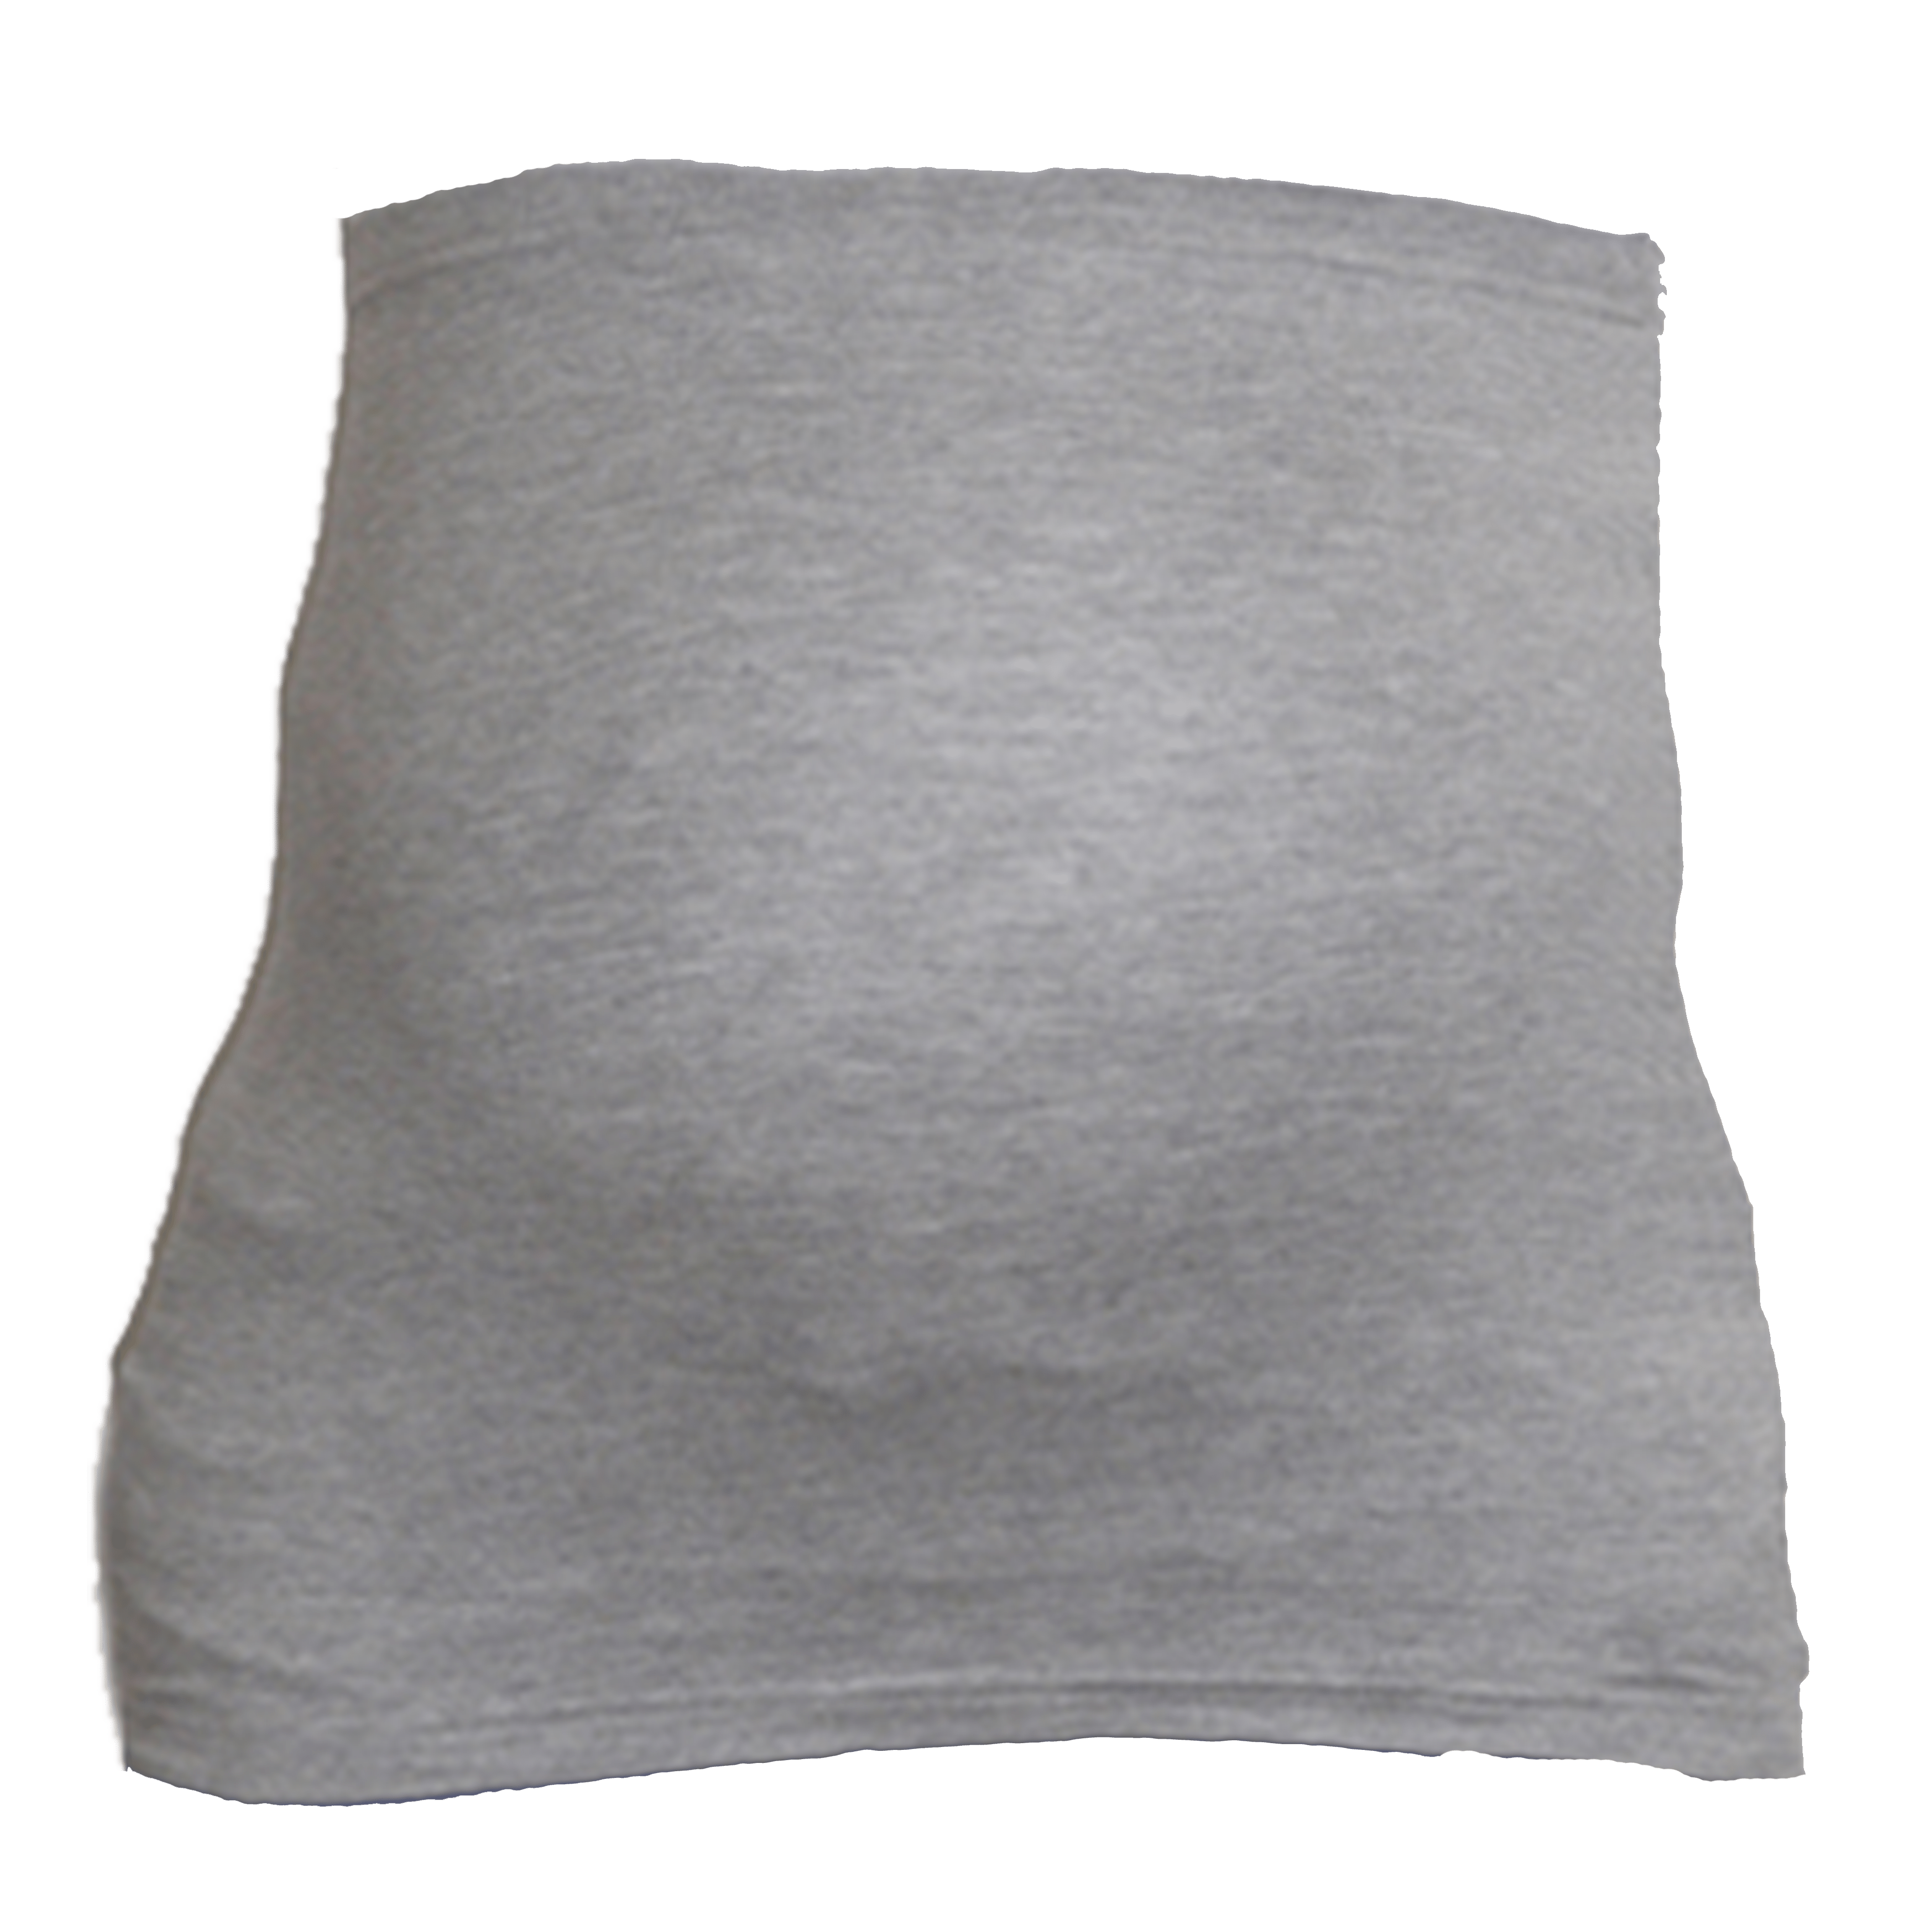 Belly band gray